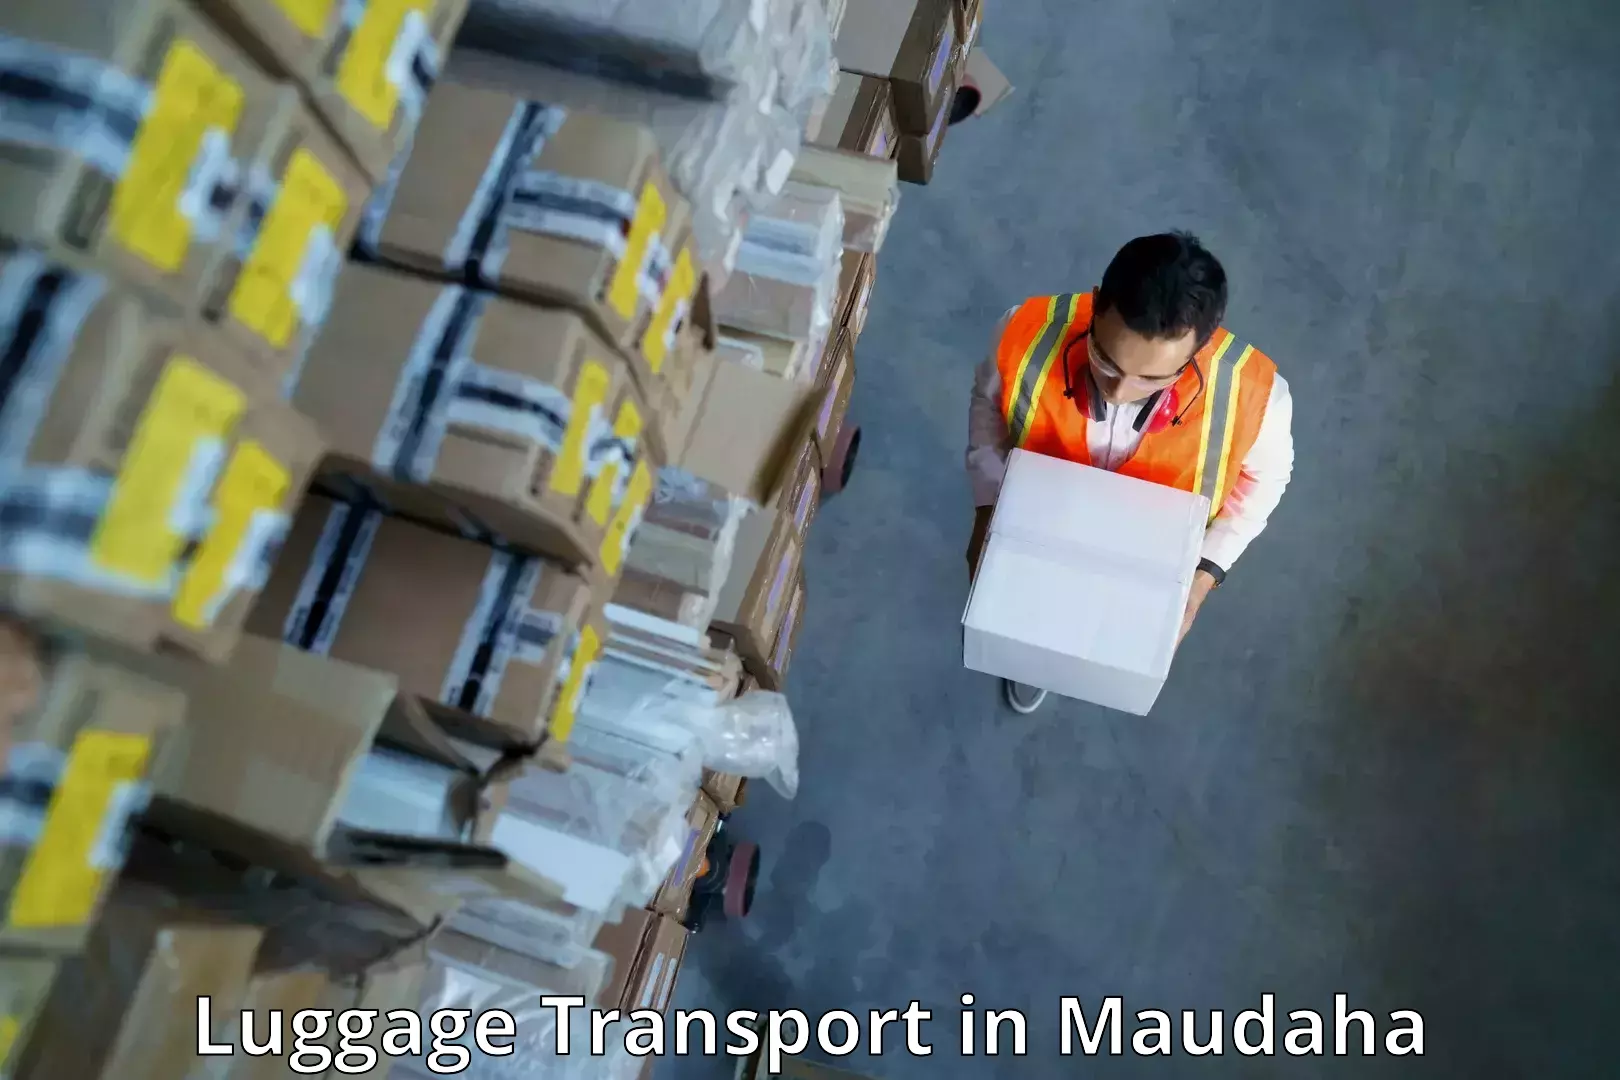 Luggage shipping planner in Maudaha